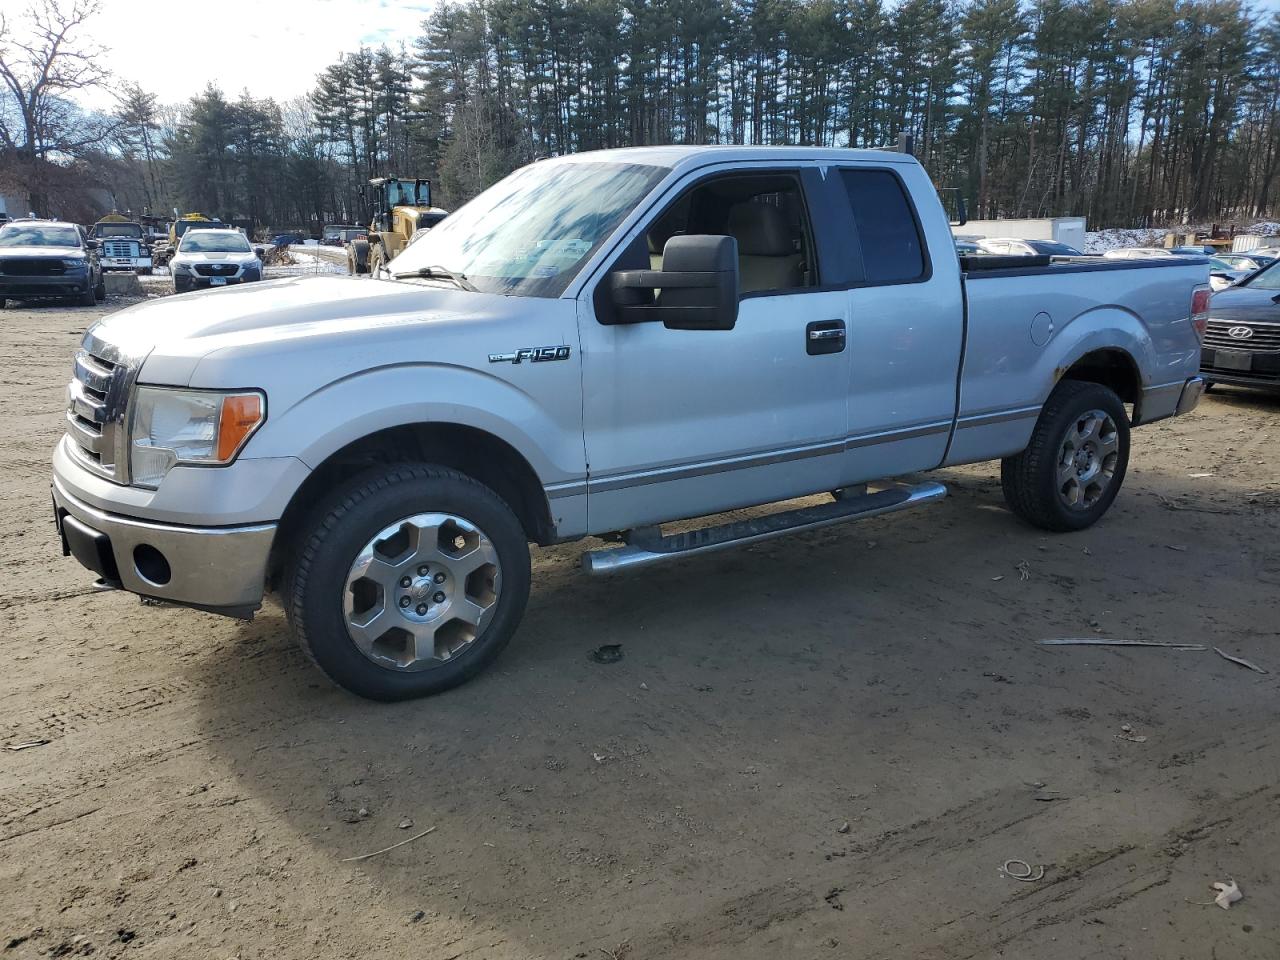 2009 Ford F-150 FX4